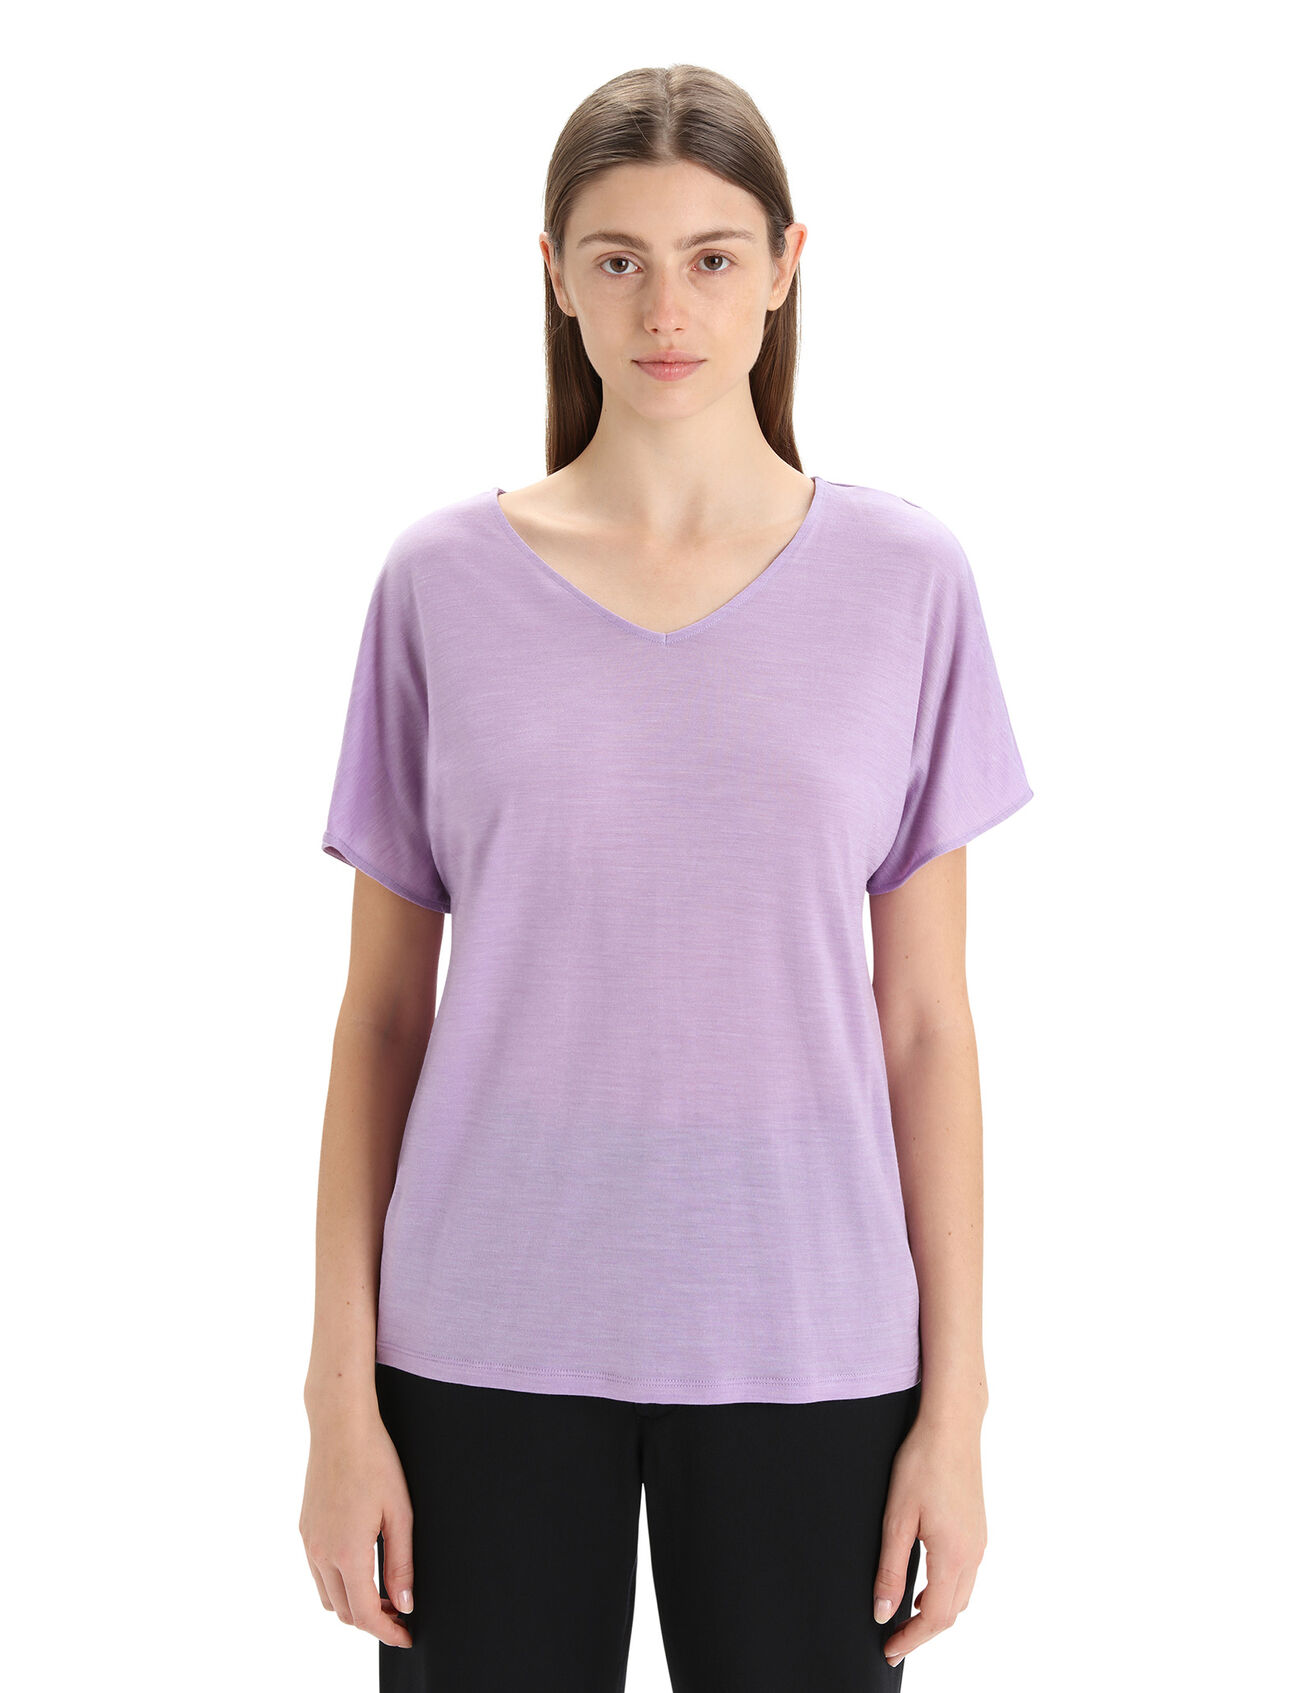 Dámské Merino Drayden Reversible Short Sleeve Top A versatile everyday shirt featuring our Cool-Lite™ jersey fabric, the Drayden Reversible Short Sleeve Top can be worn frontwards for a soft V neck, or backwards for a high crew neck.